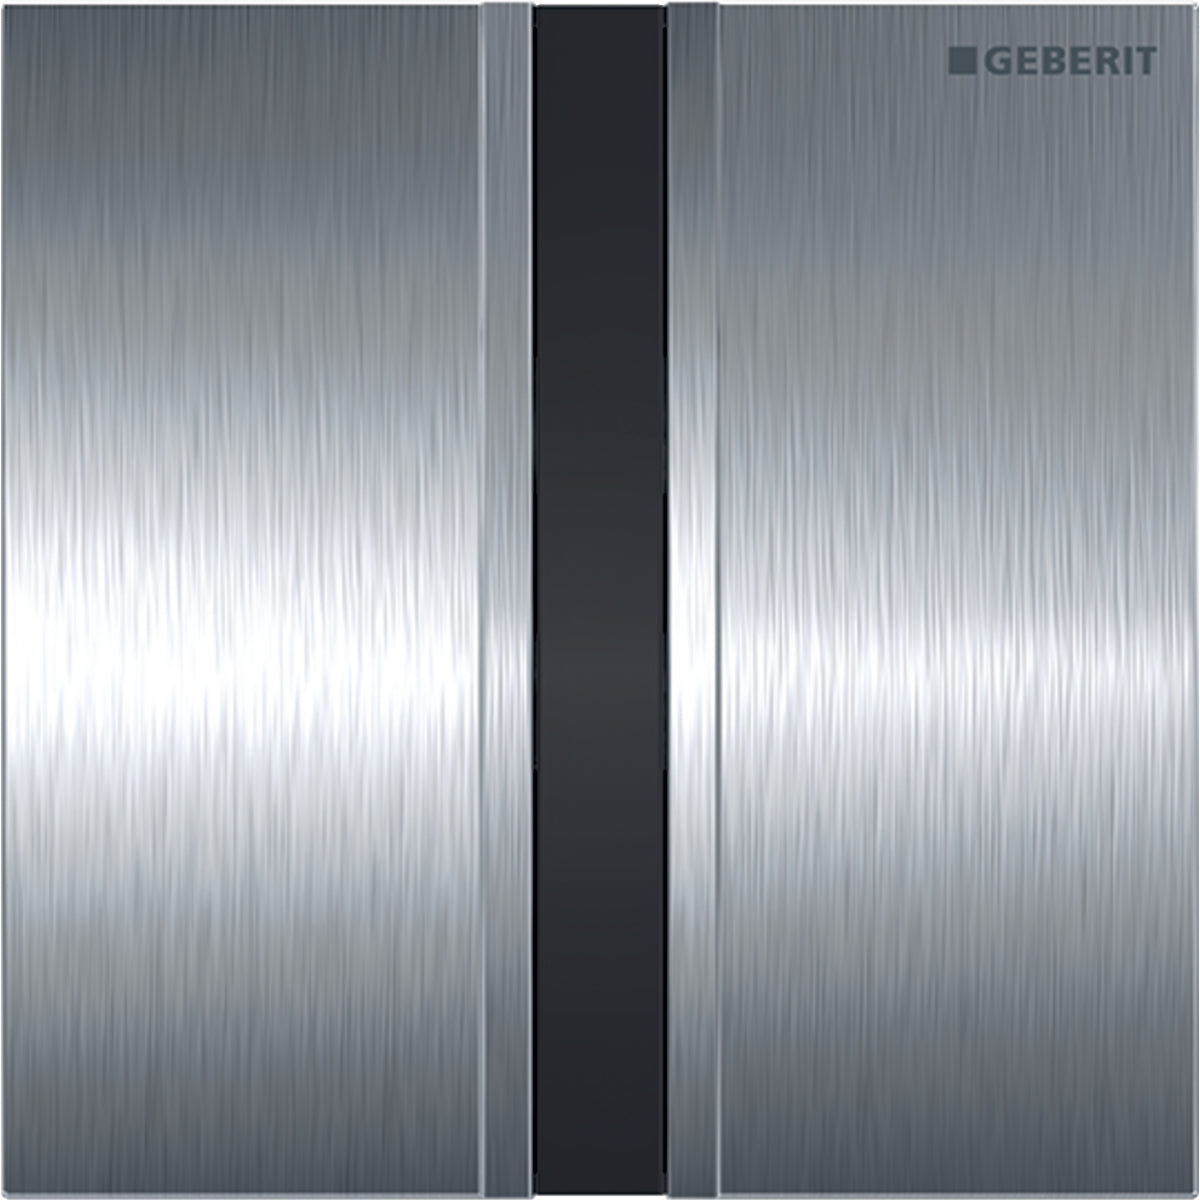 Geberit 116.026.GH.1- Geberit urinal flush control with electronic flush actuation, mains operation, cover plate type 50: chrome-plated, brushed - FaucetExpress.ca